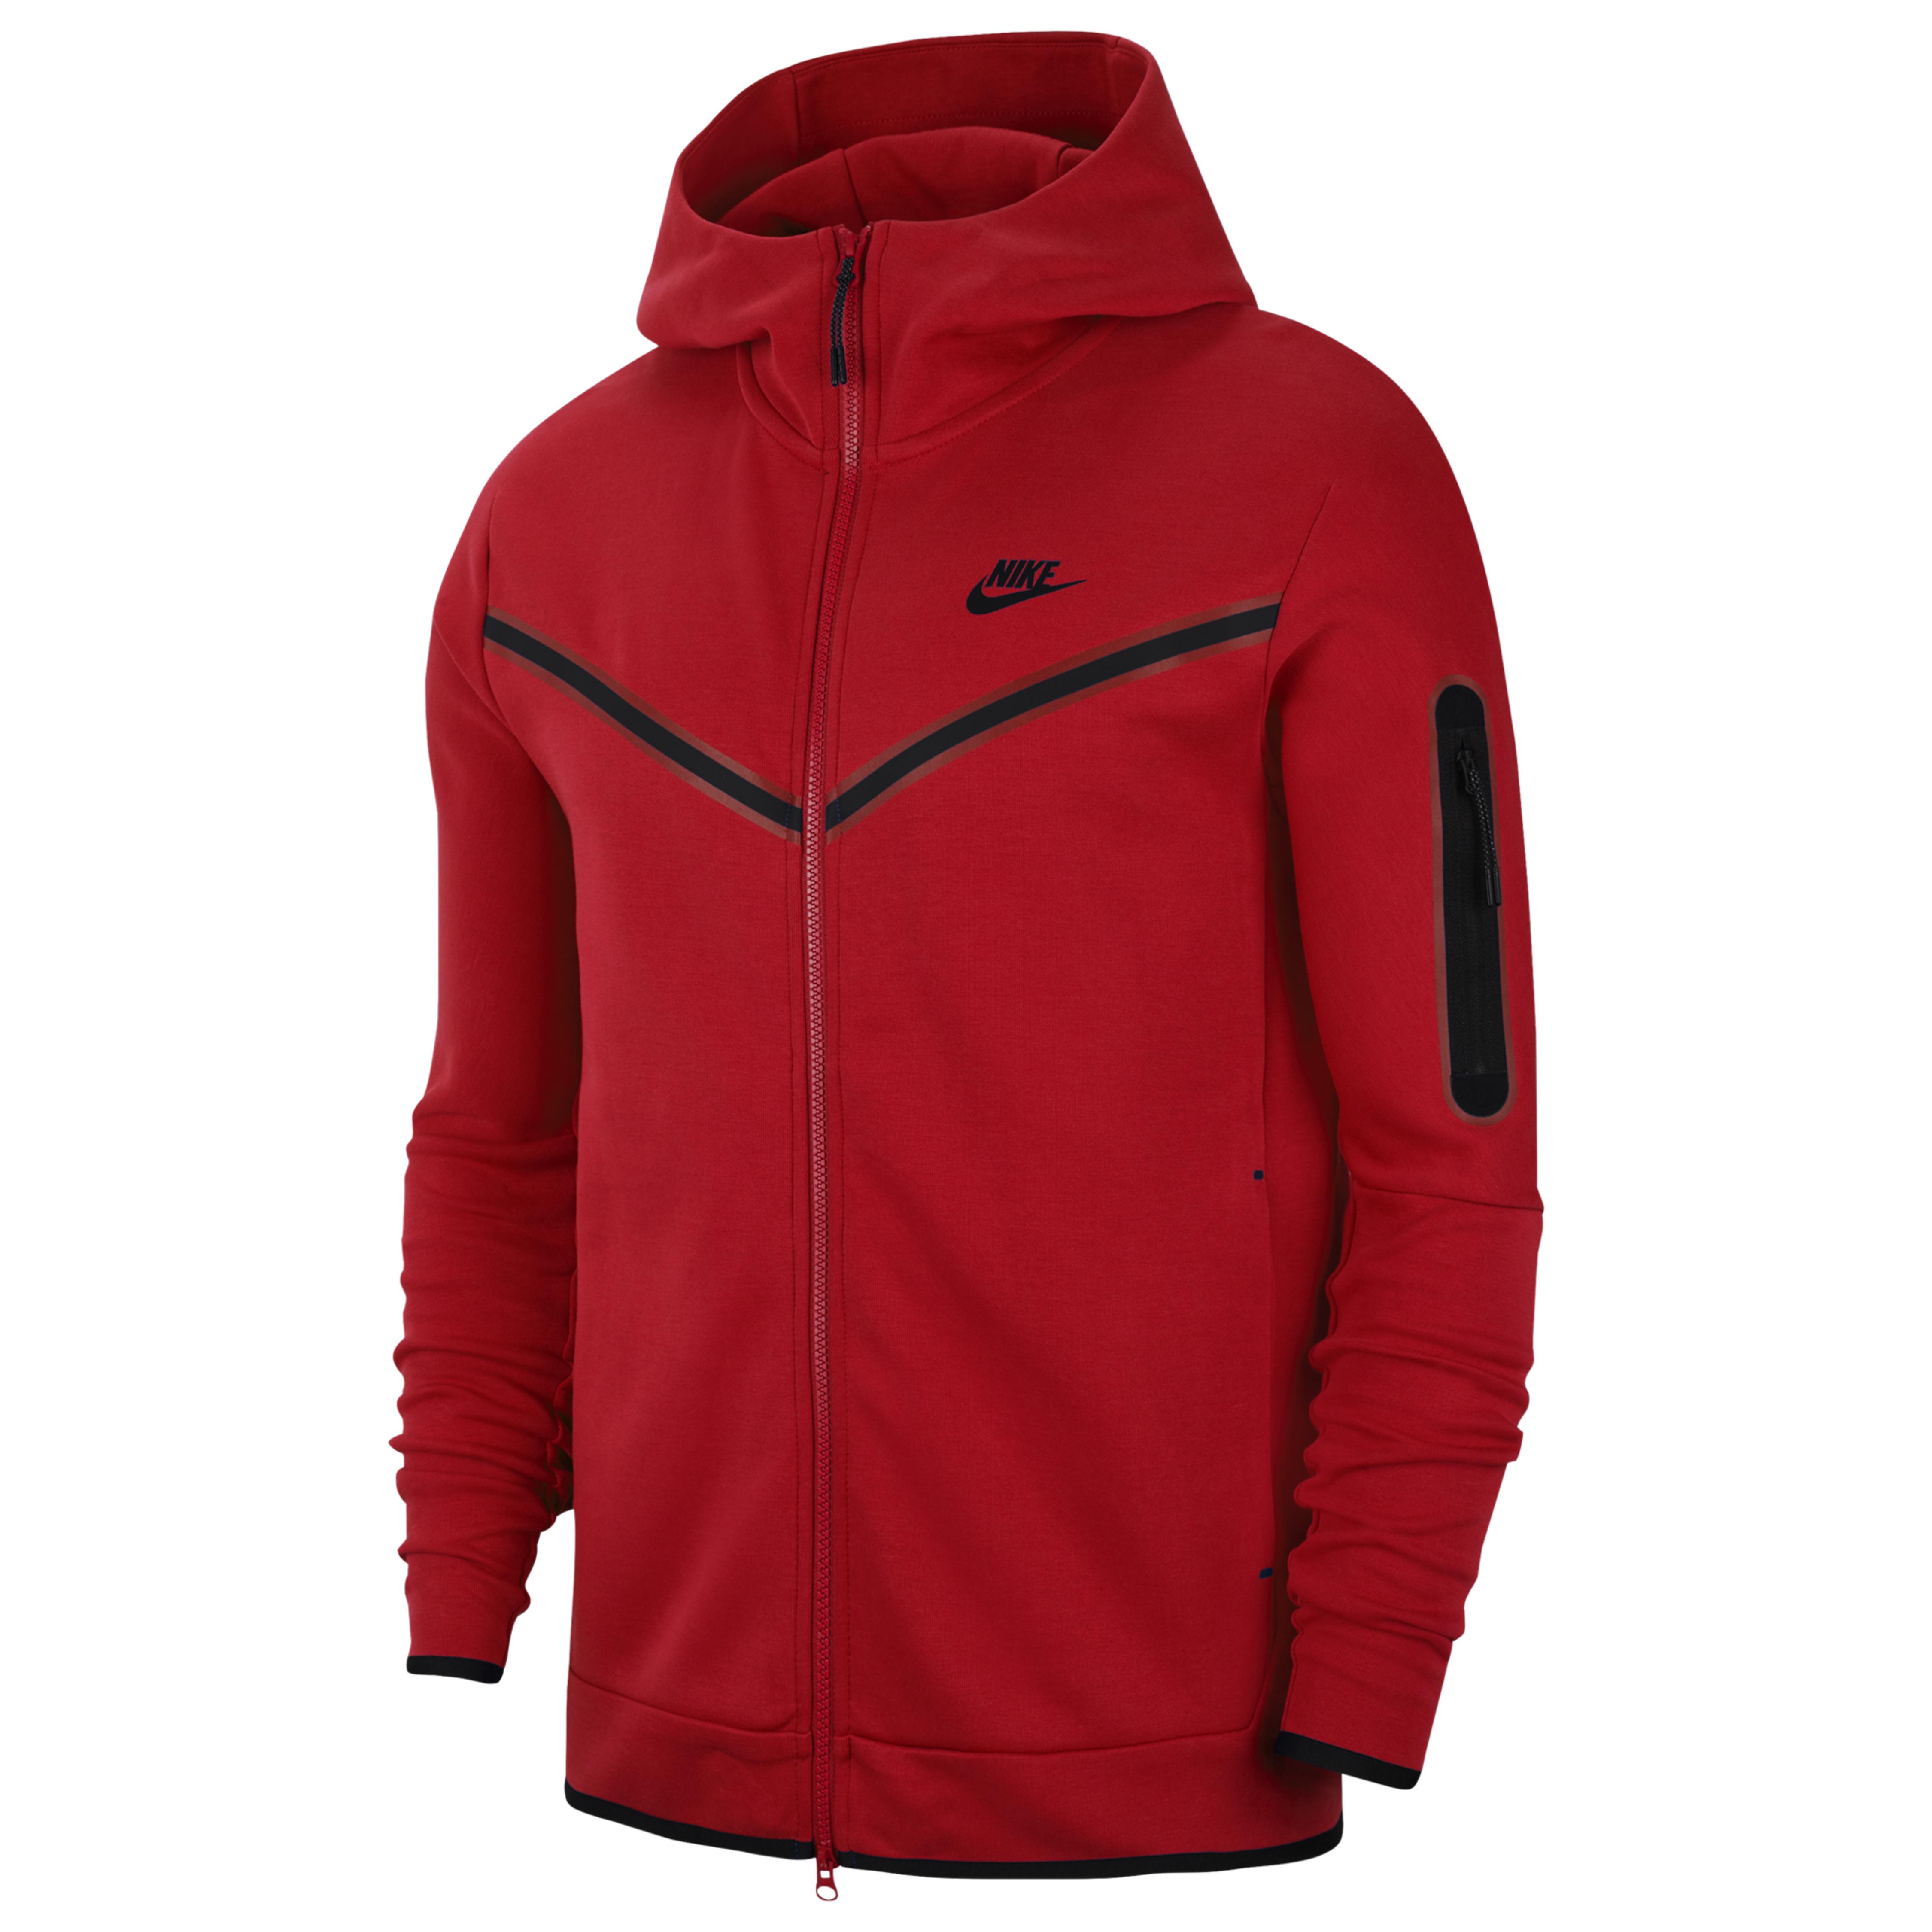 Sale > nike red zip up jacket > in stock